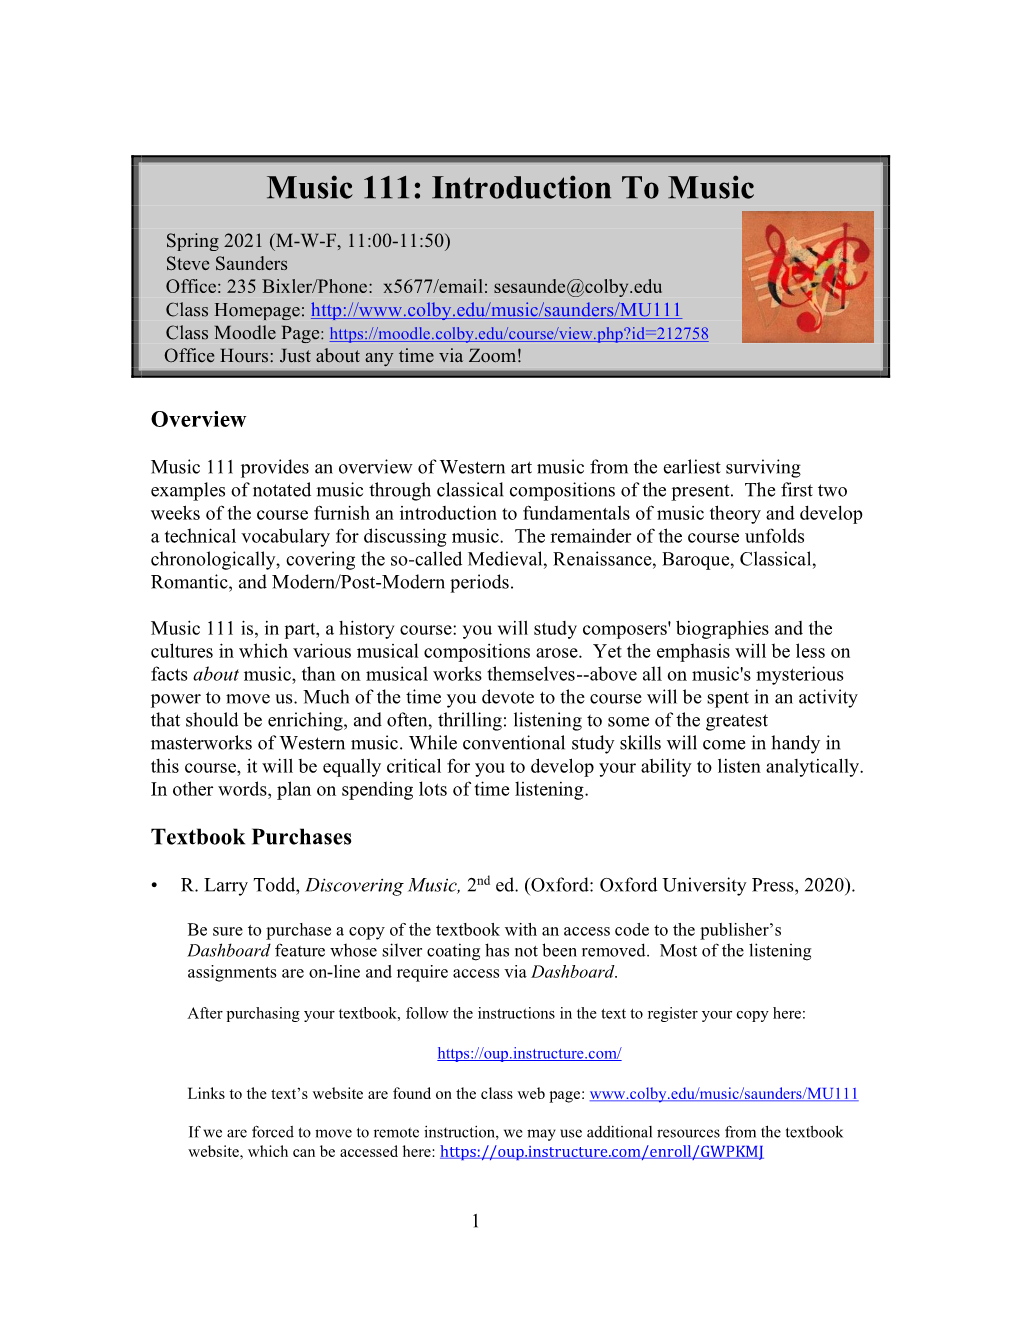 Music 111: Introduction to Music